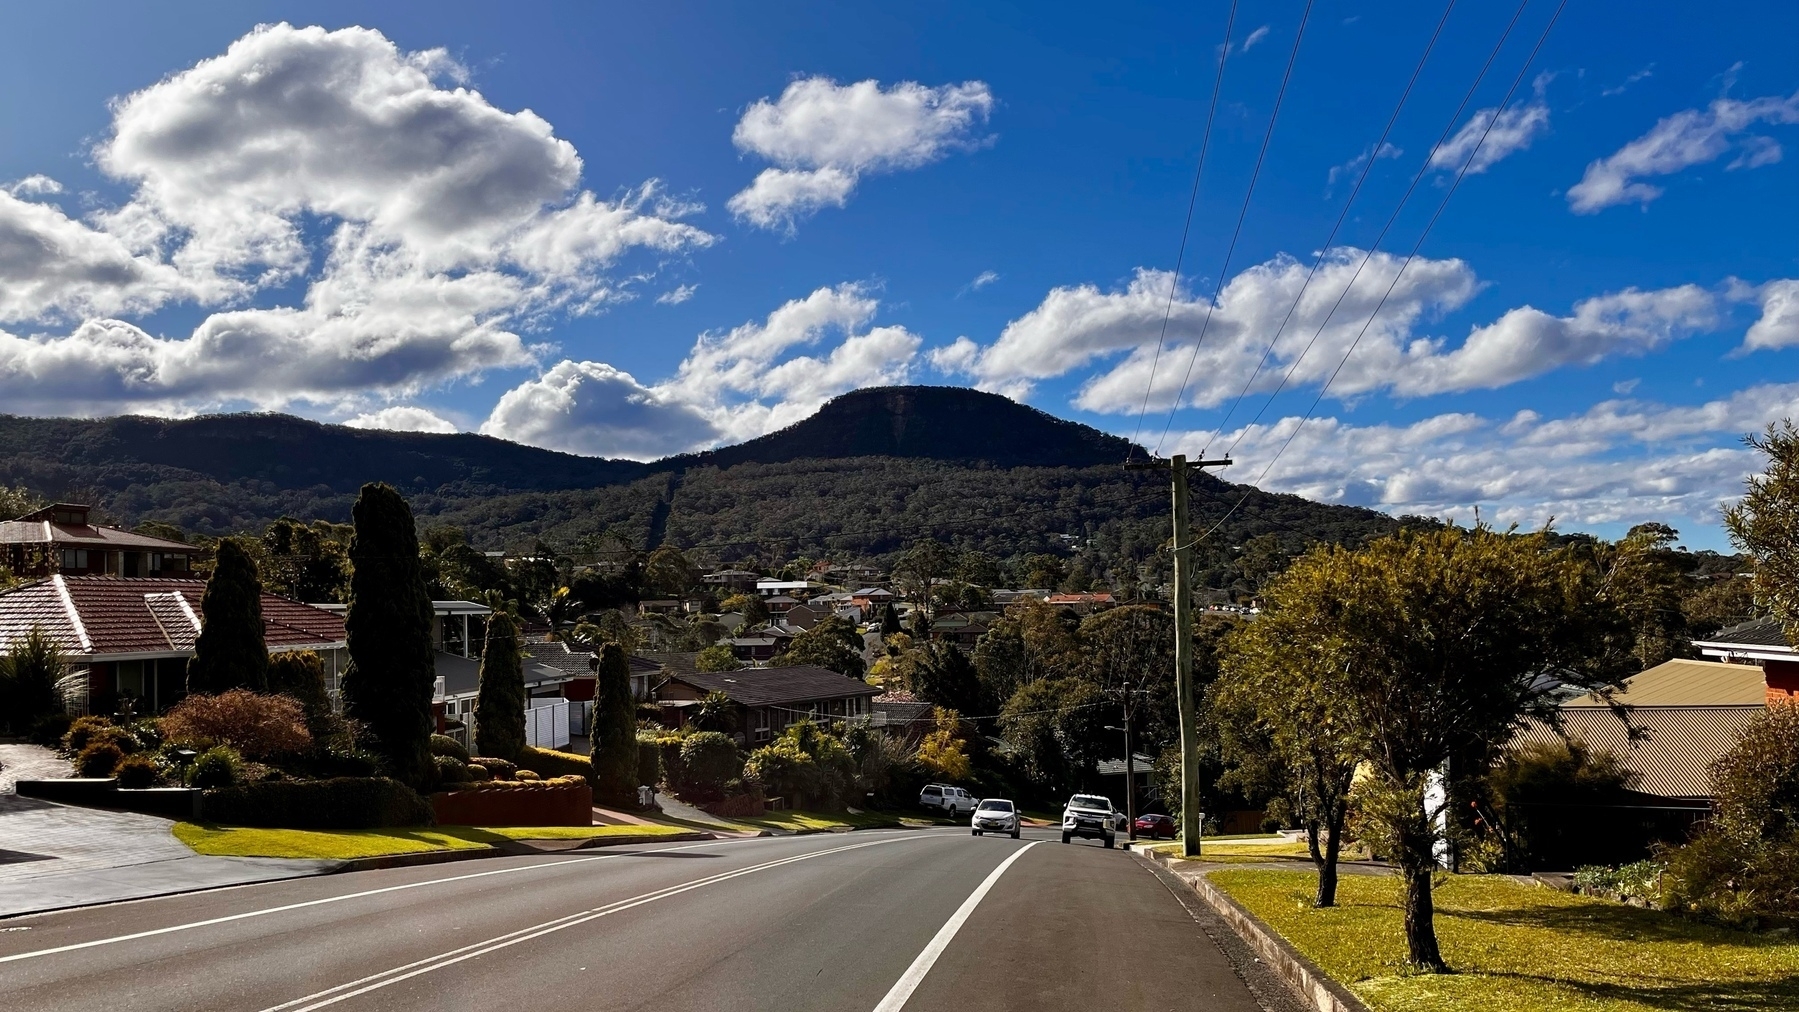 A road going down a hill, with a mountain and blue sky overhead